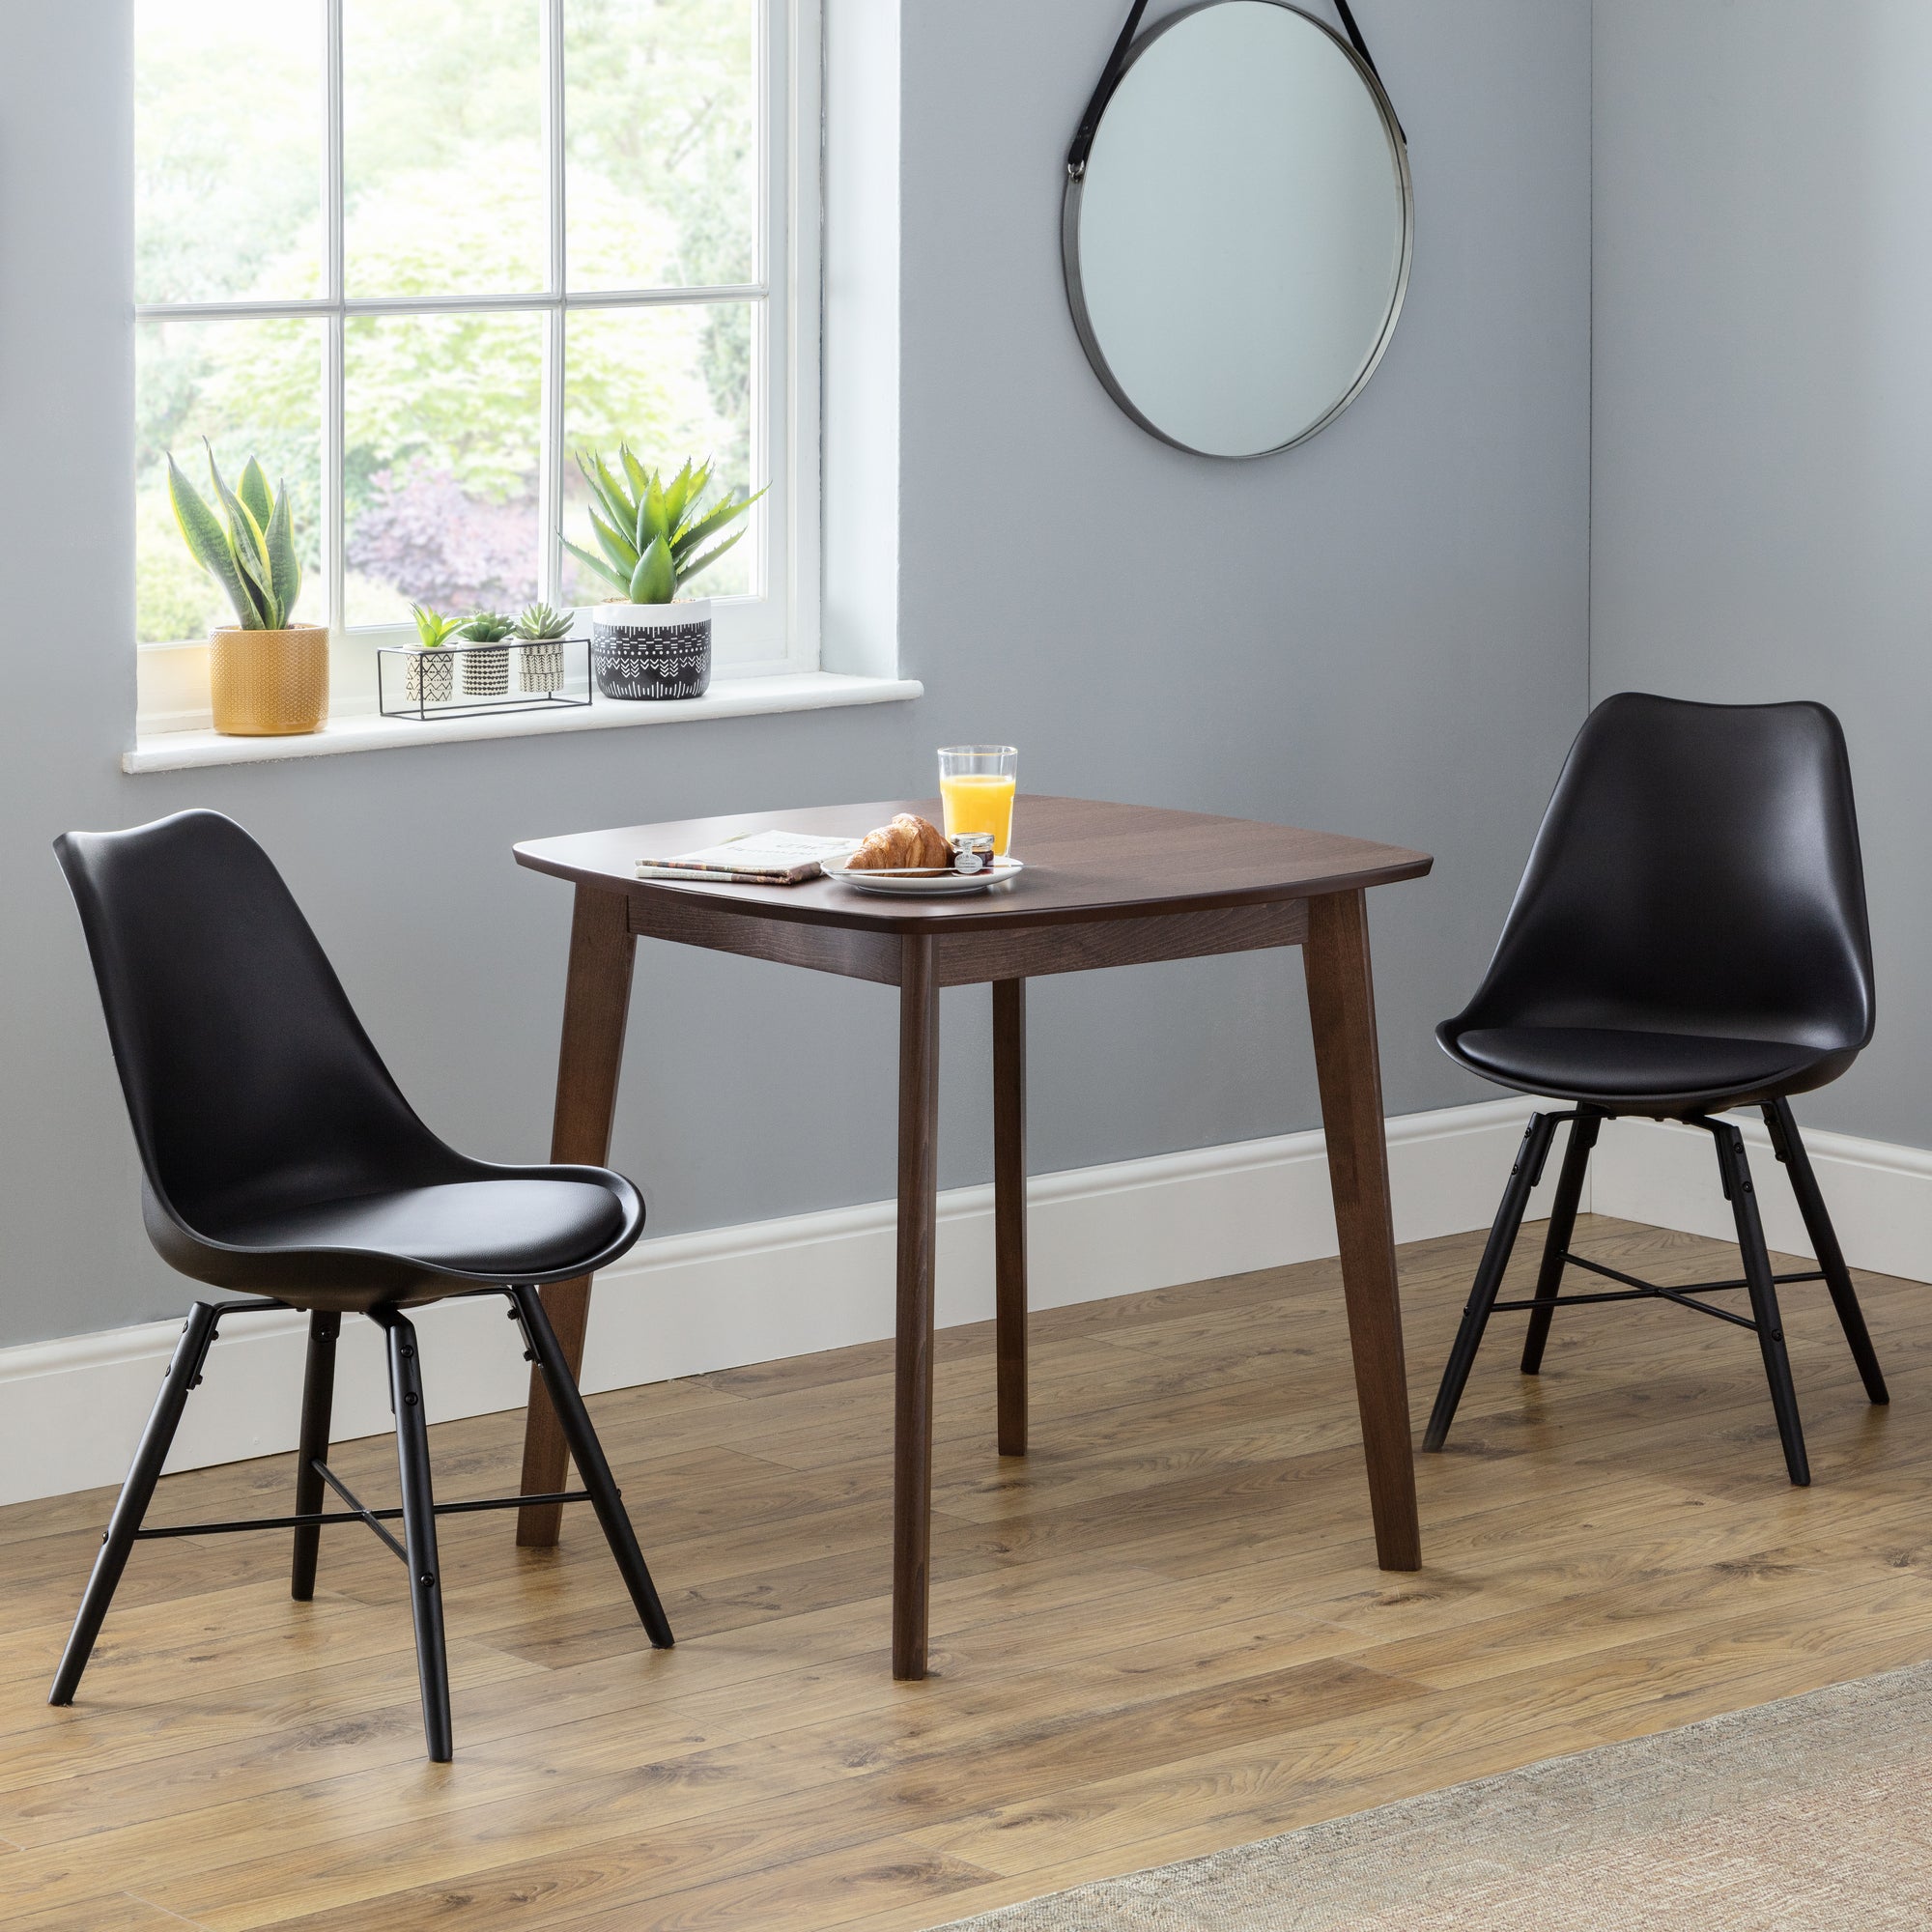 Lennox Square Dining Table with 2 Kari Chairs, Beech Wood Brown